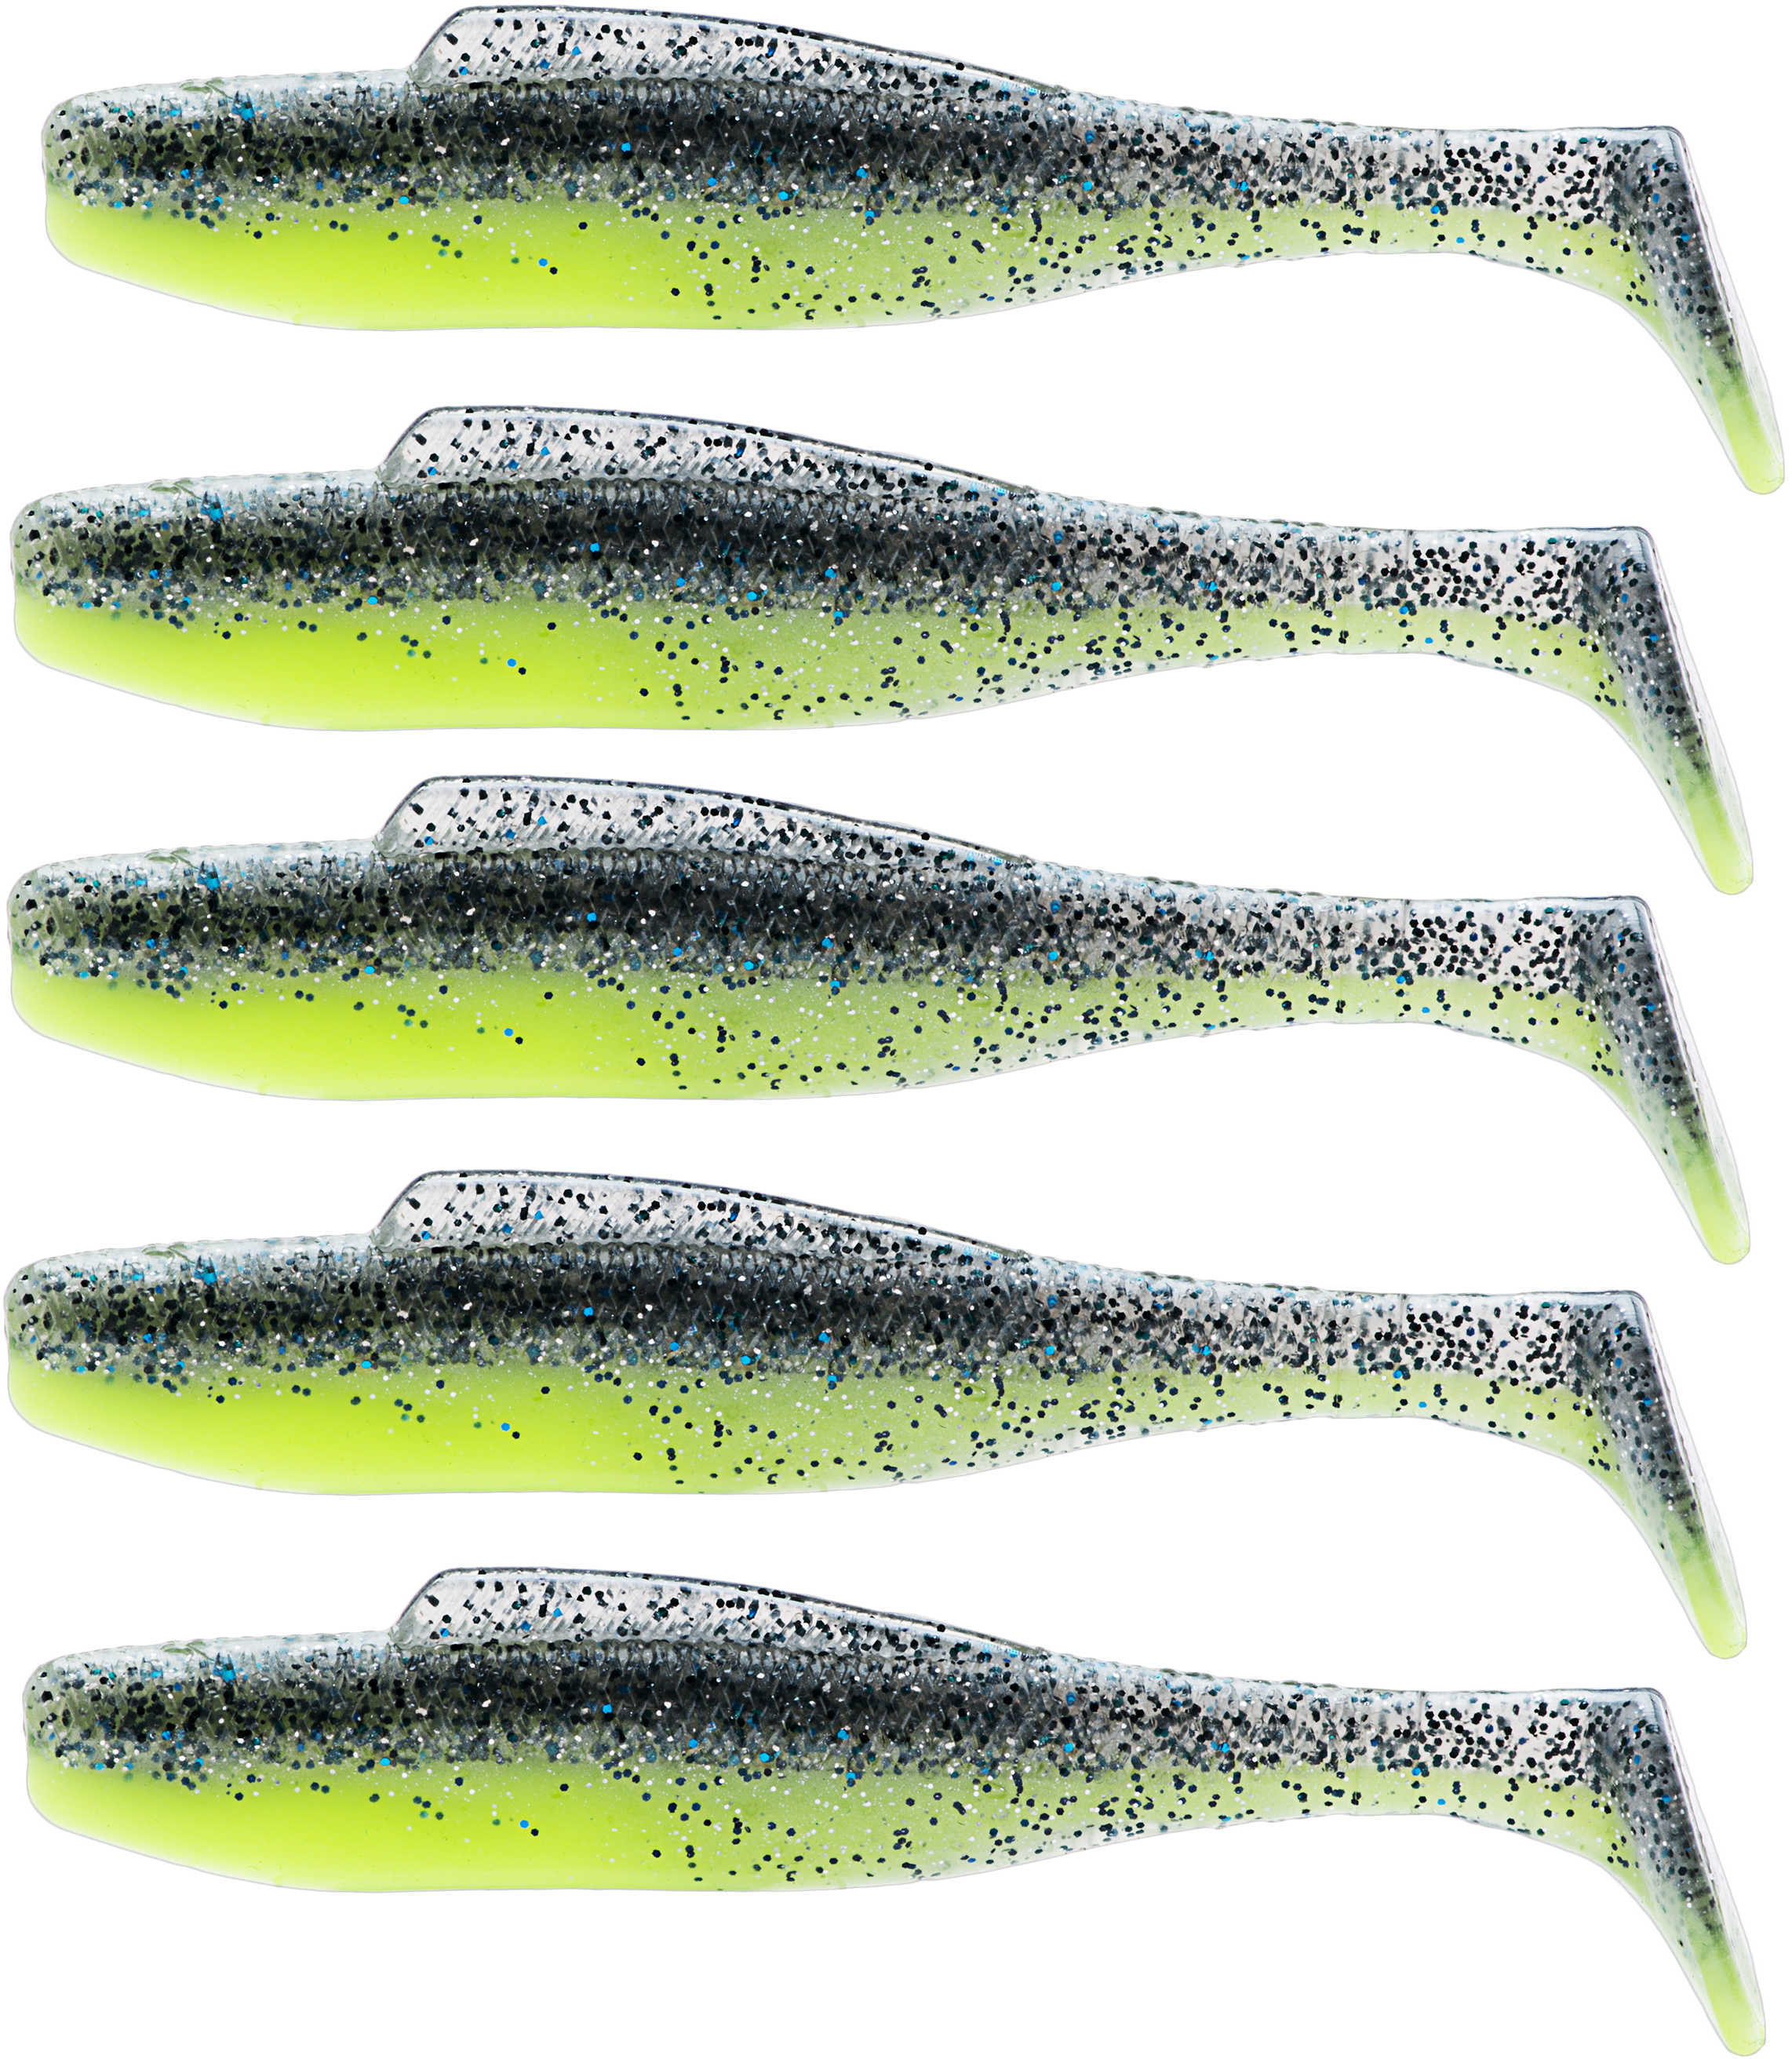 Z-Man DieZel MinnowZ Lures 4" Length, Sexy Mullet, Package of 5